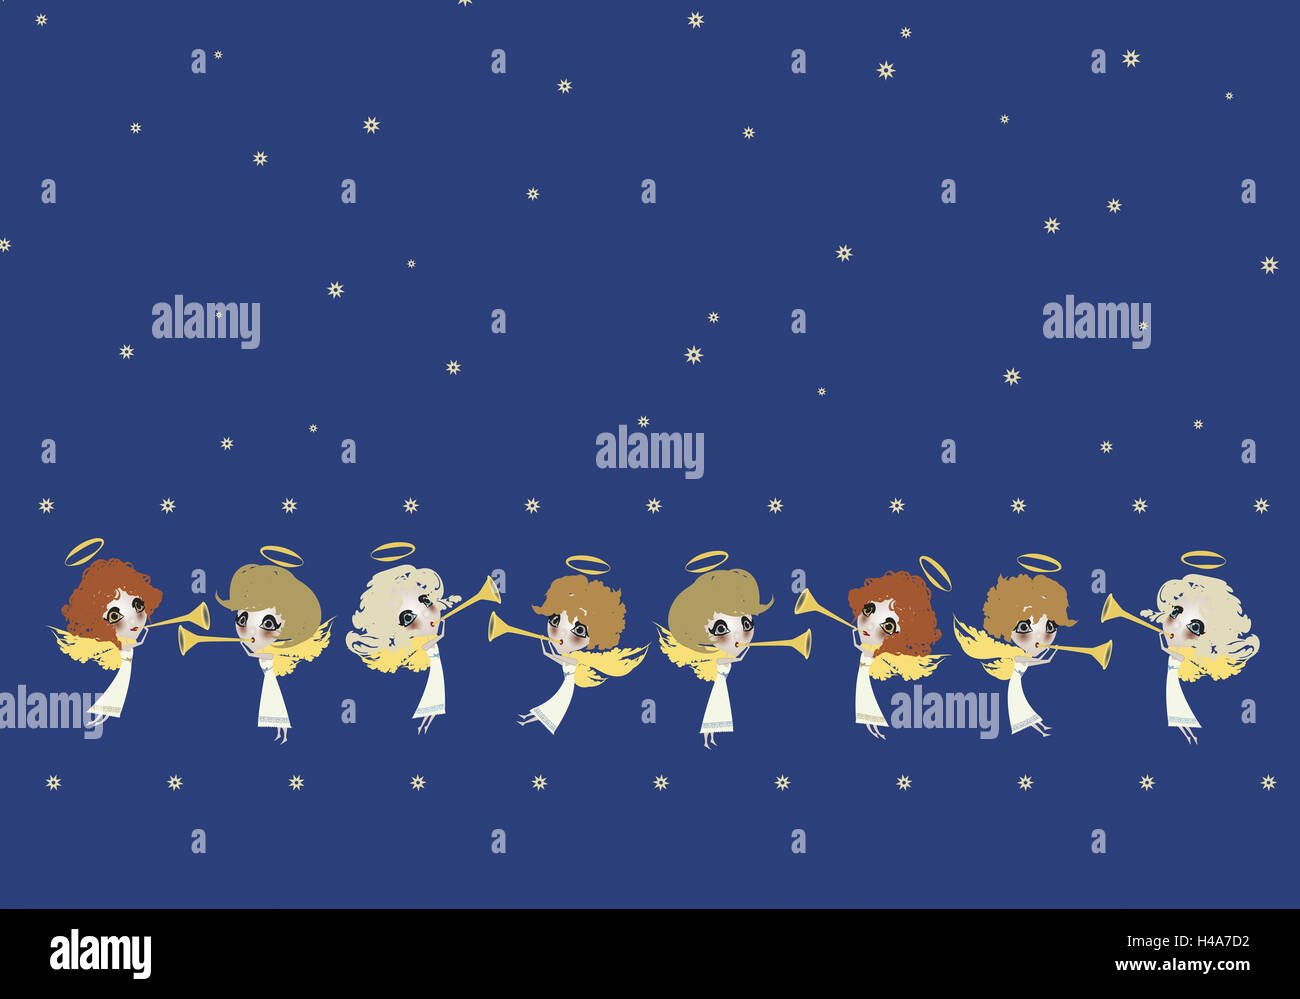 Illustration, sky, angel, eight, trumpets, graphics, stars, celestial body, figures, little angels, for Christmas, heavenly, side by side, differently, halo, wing, fly, play music, musician, make music, trombones, group, orchestras, together, together, wh Stock Photo